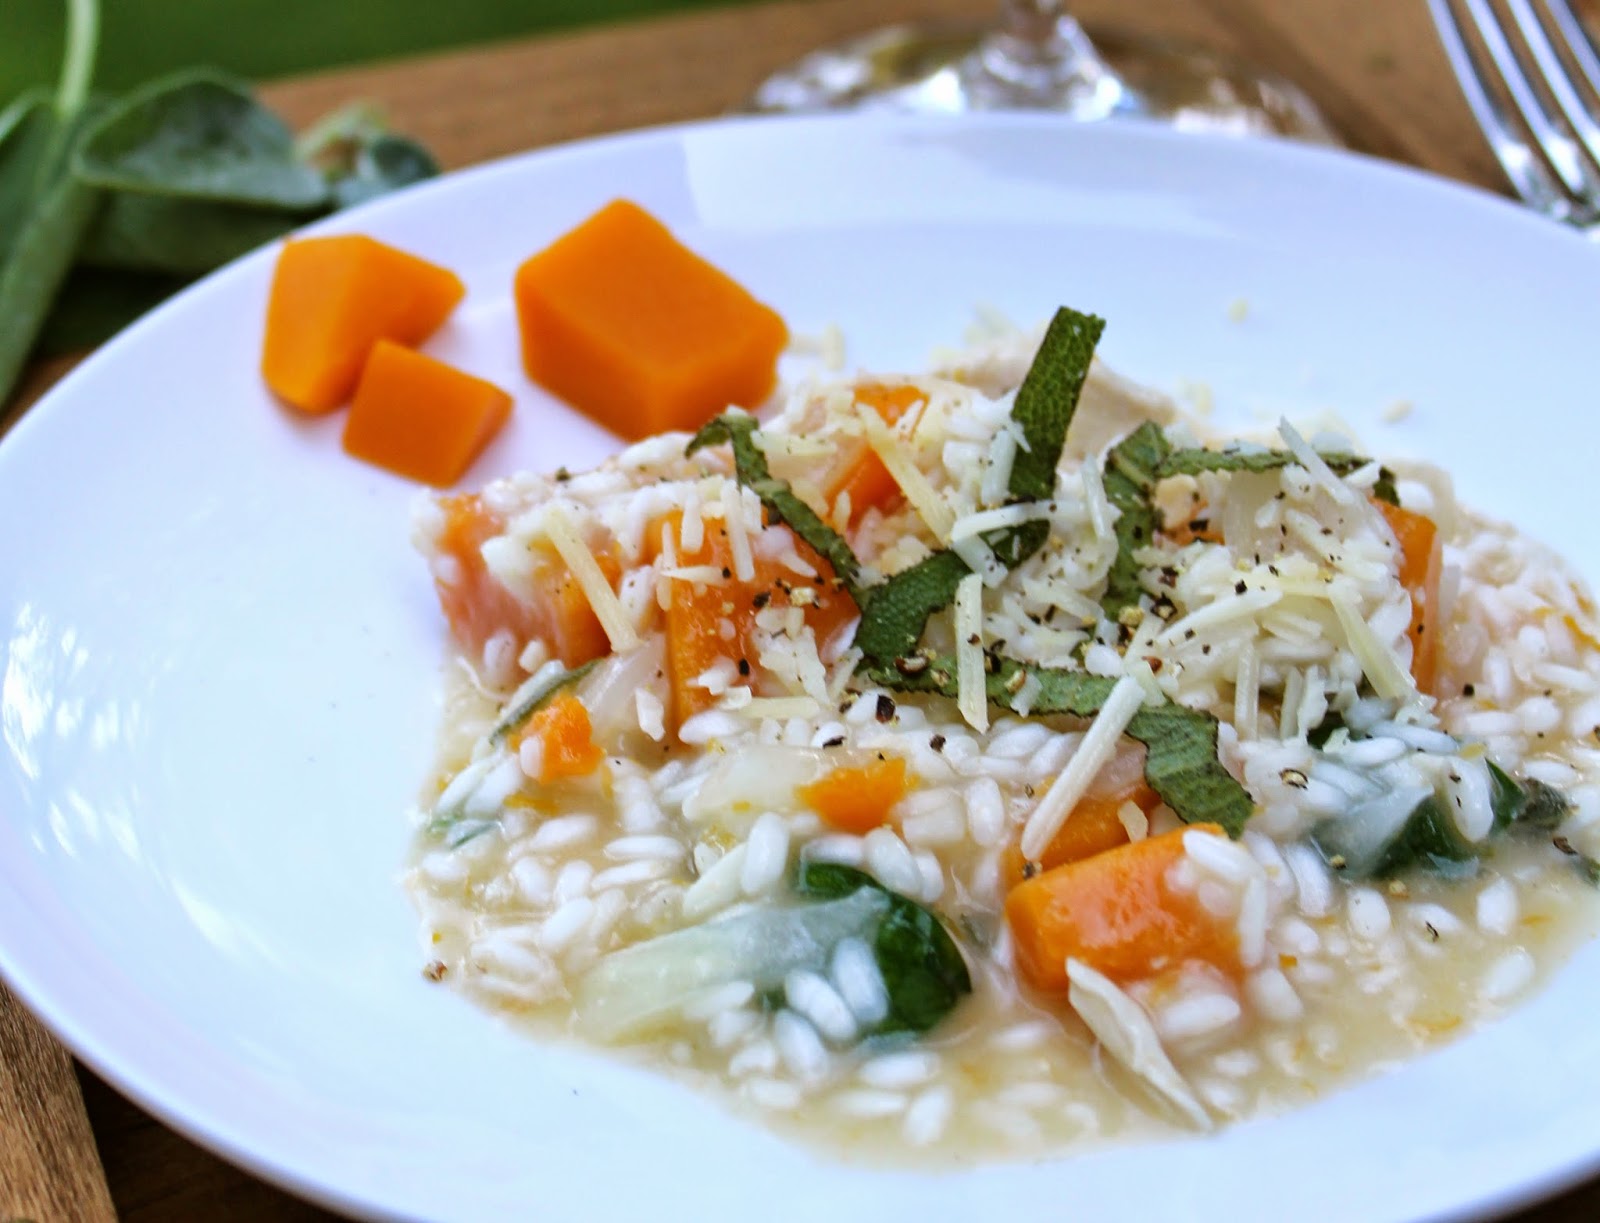 Risotto with Butternut Squash, Chicken and Sage for #SundaySupper.